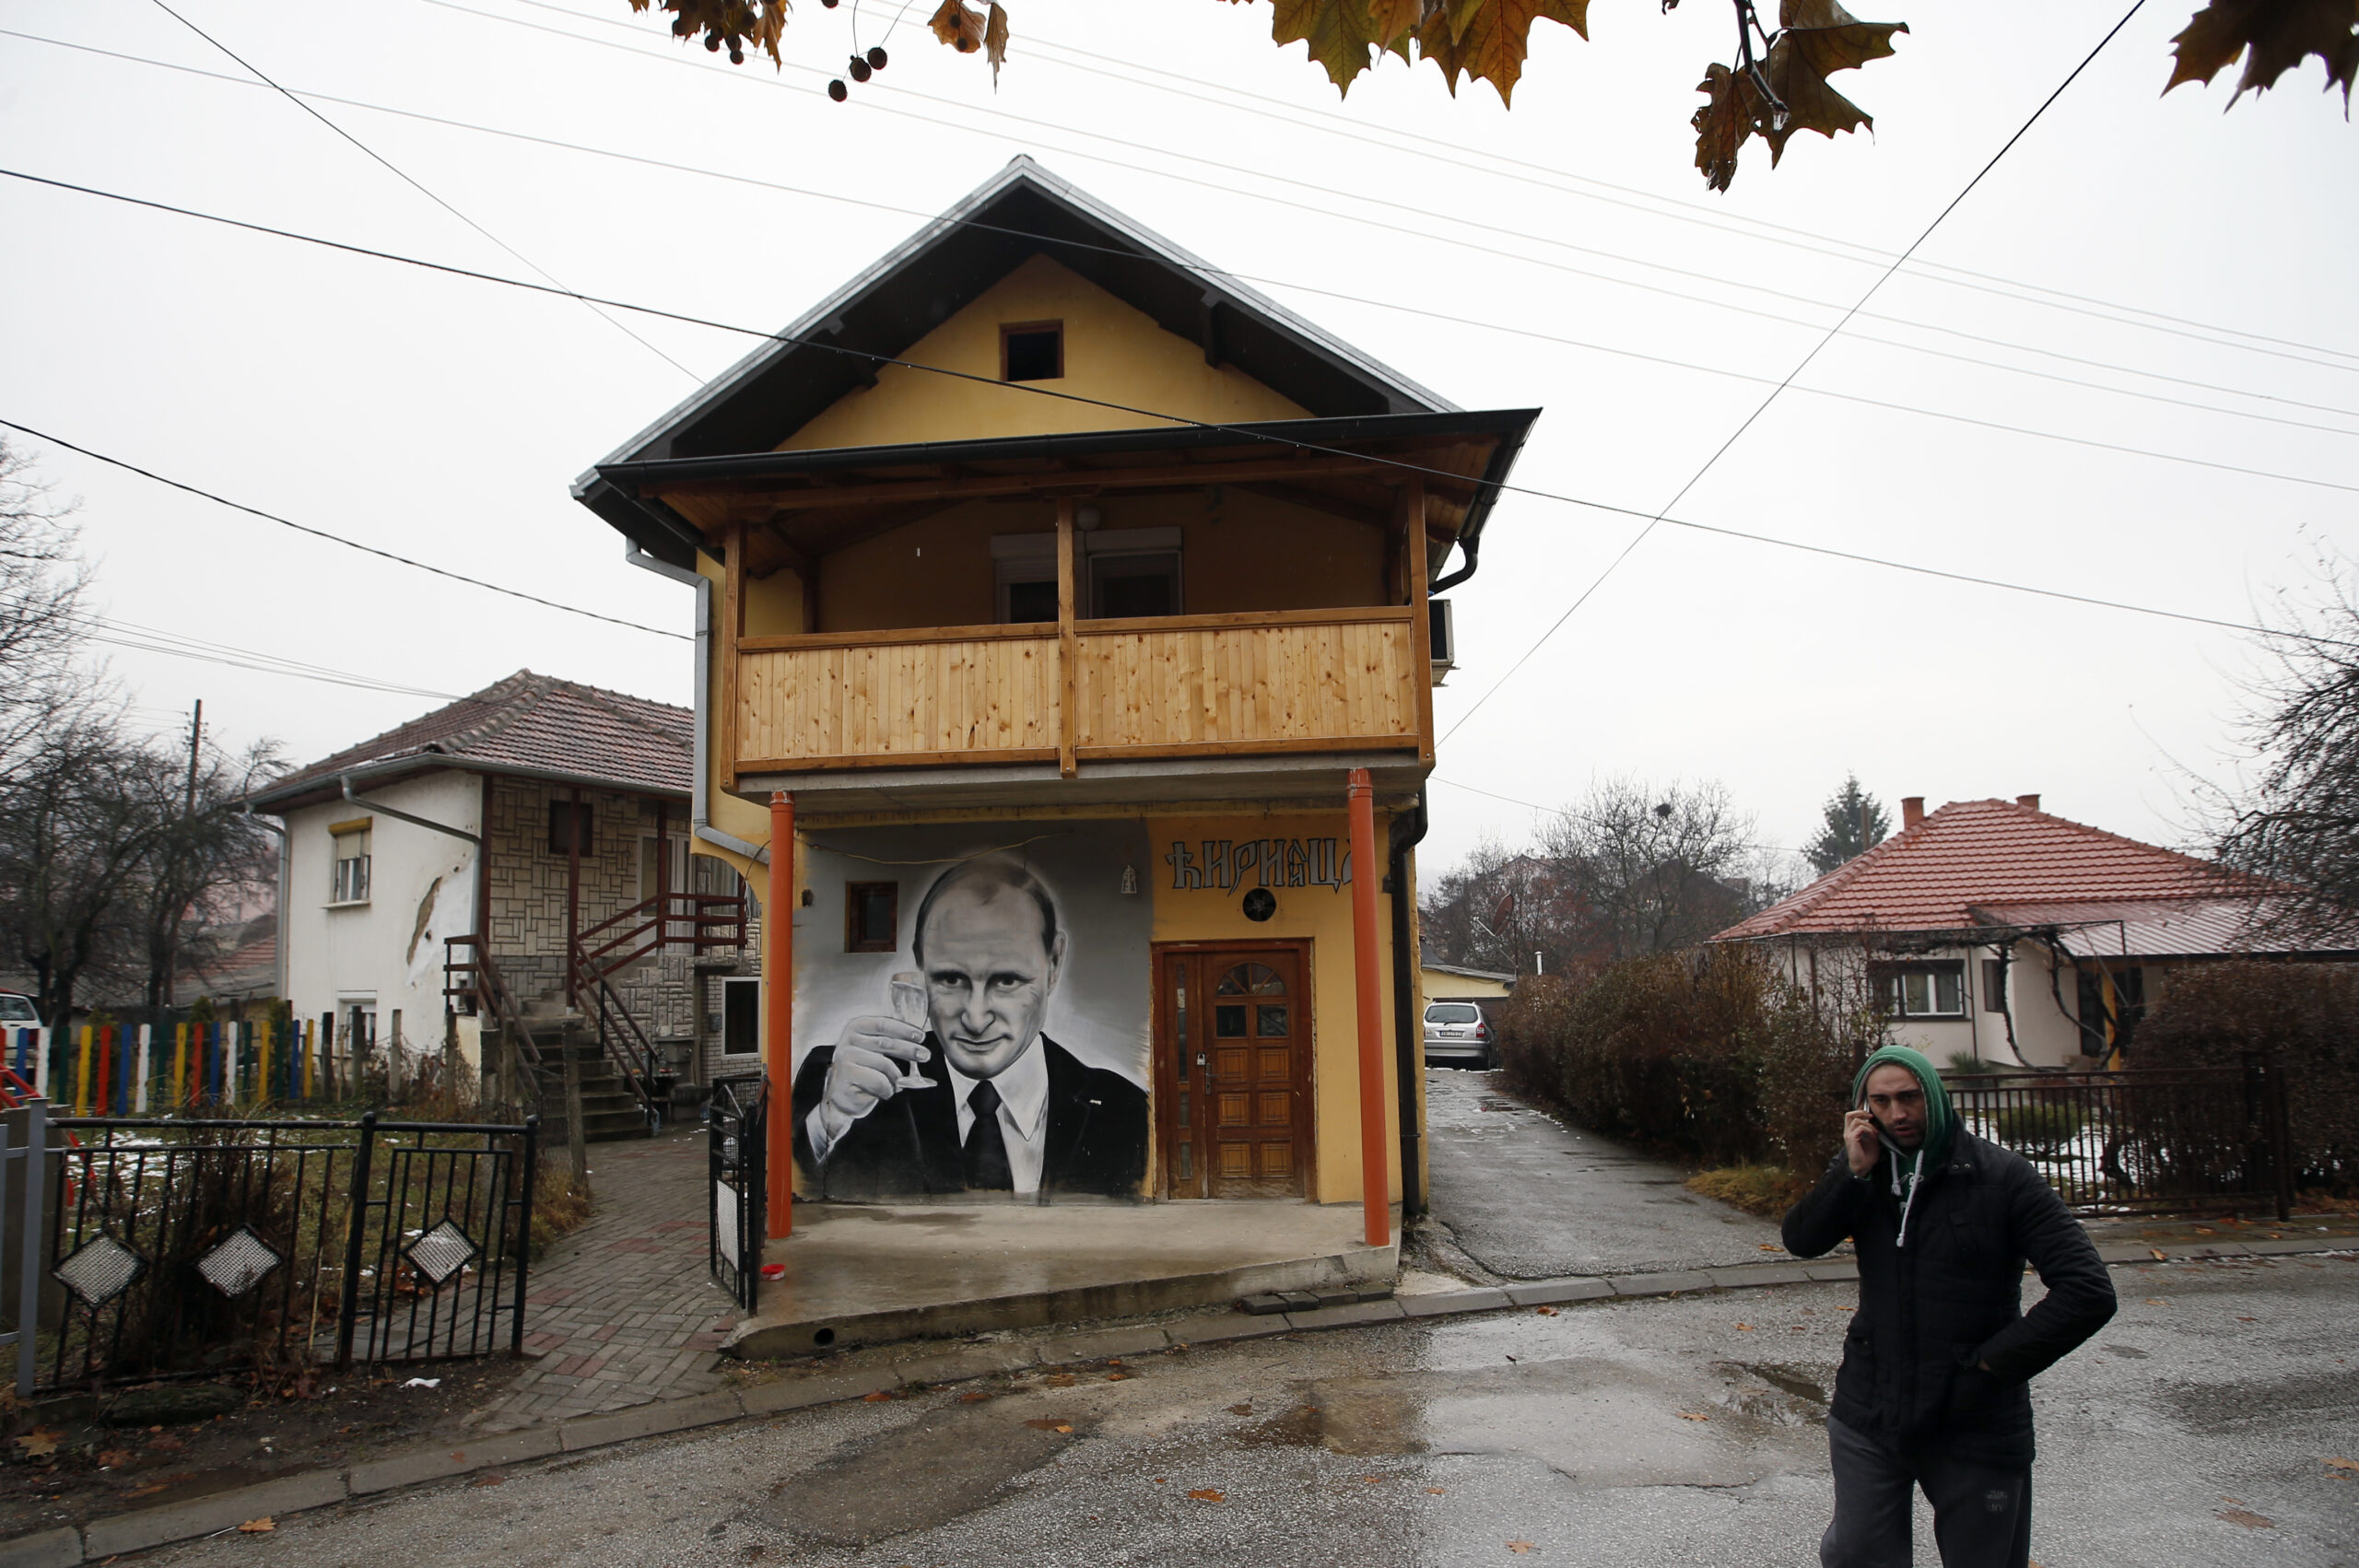 FILE - A man walks past a mural depicting Vladimir Putin, in Zvecan, Kosovo, Dec. 15, 2018. For some European countries watching Russia's bloody invasion of Ukraine, there are fears that they could be next. Western officials say the most vulnerable could be those who are not members of the NATO military alliance or the European Union, and thus alone and unprotected — including Ukraine’s neighbor Moldova and Russia's neighbor Georgia, both of them formerly part of the Soviet Union — along with the Balkan states of Bosnia and Kosovo. (AP Photo/Darko Vojinovic, File)